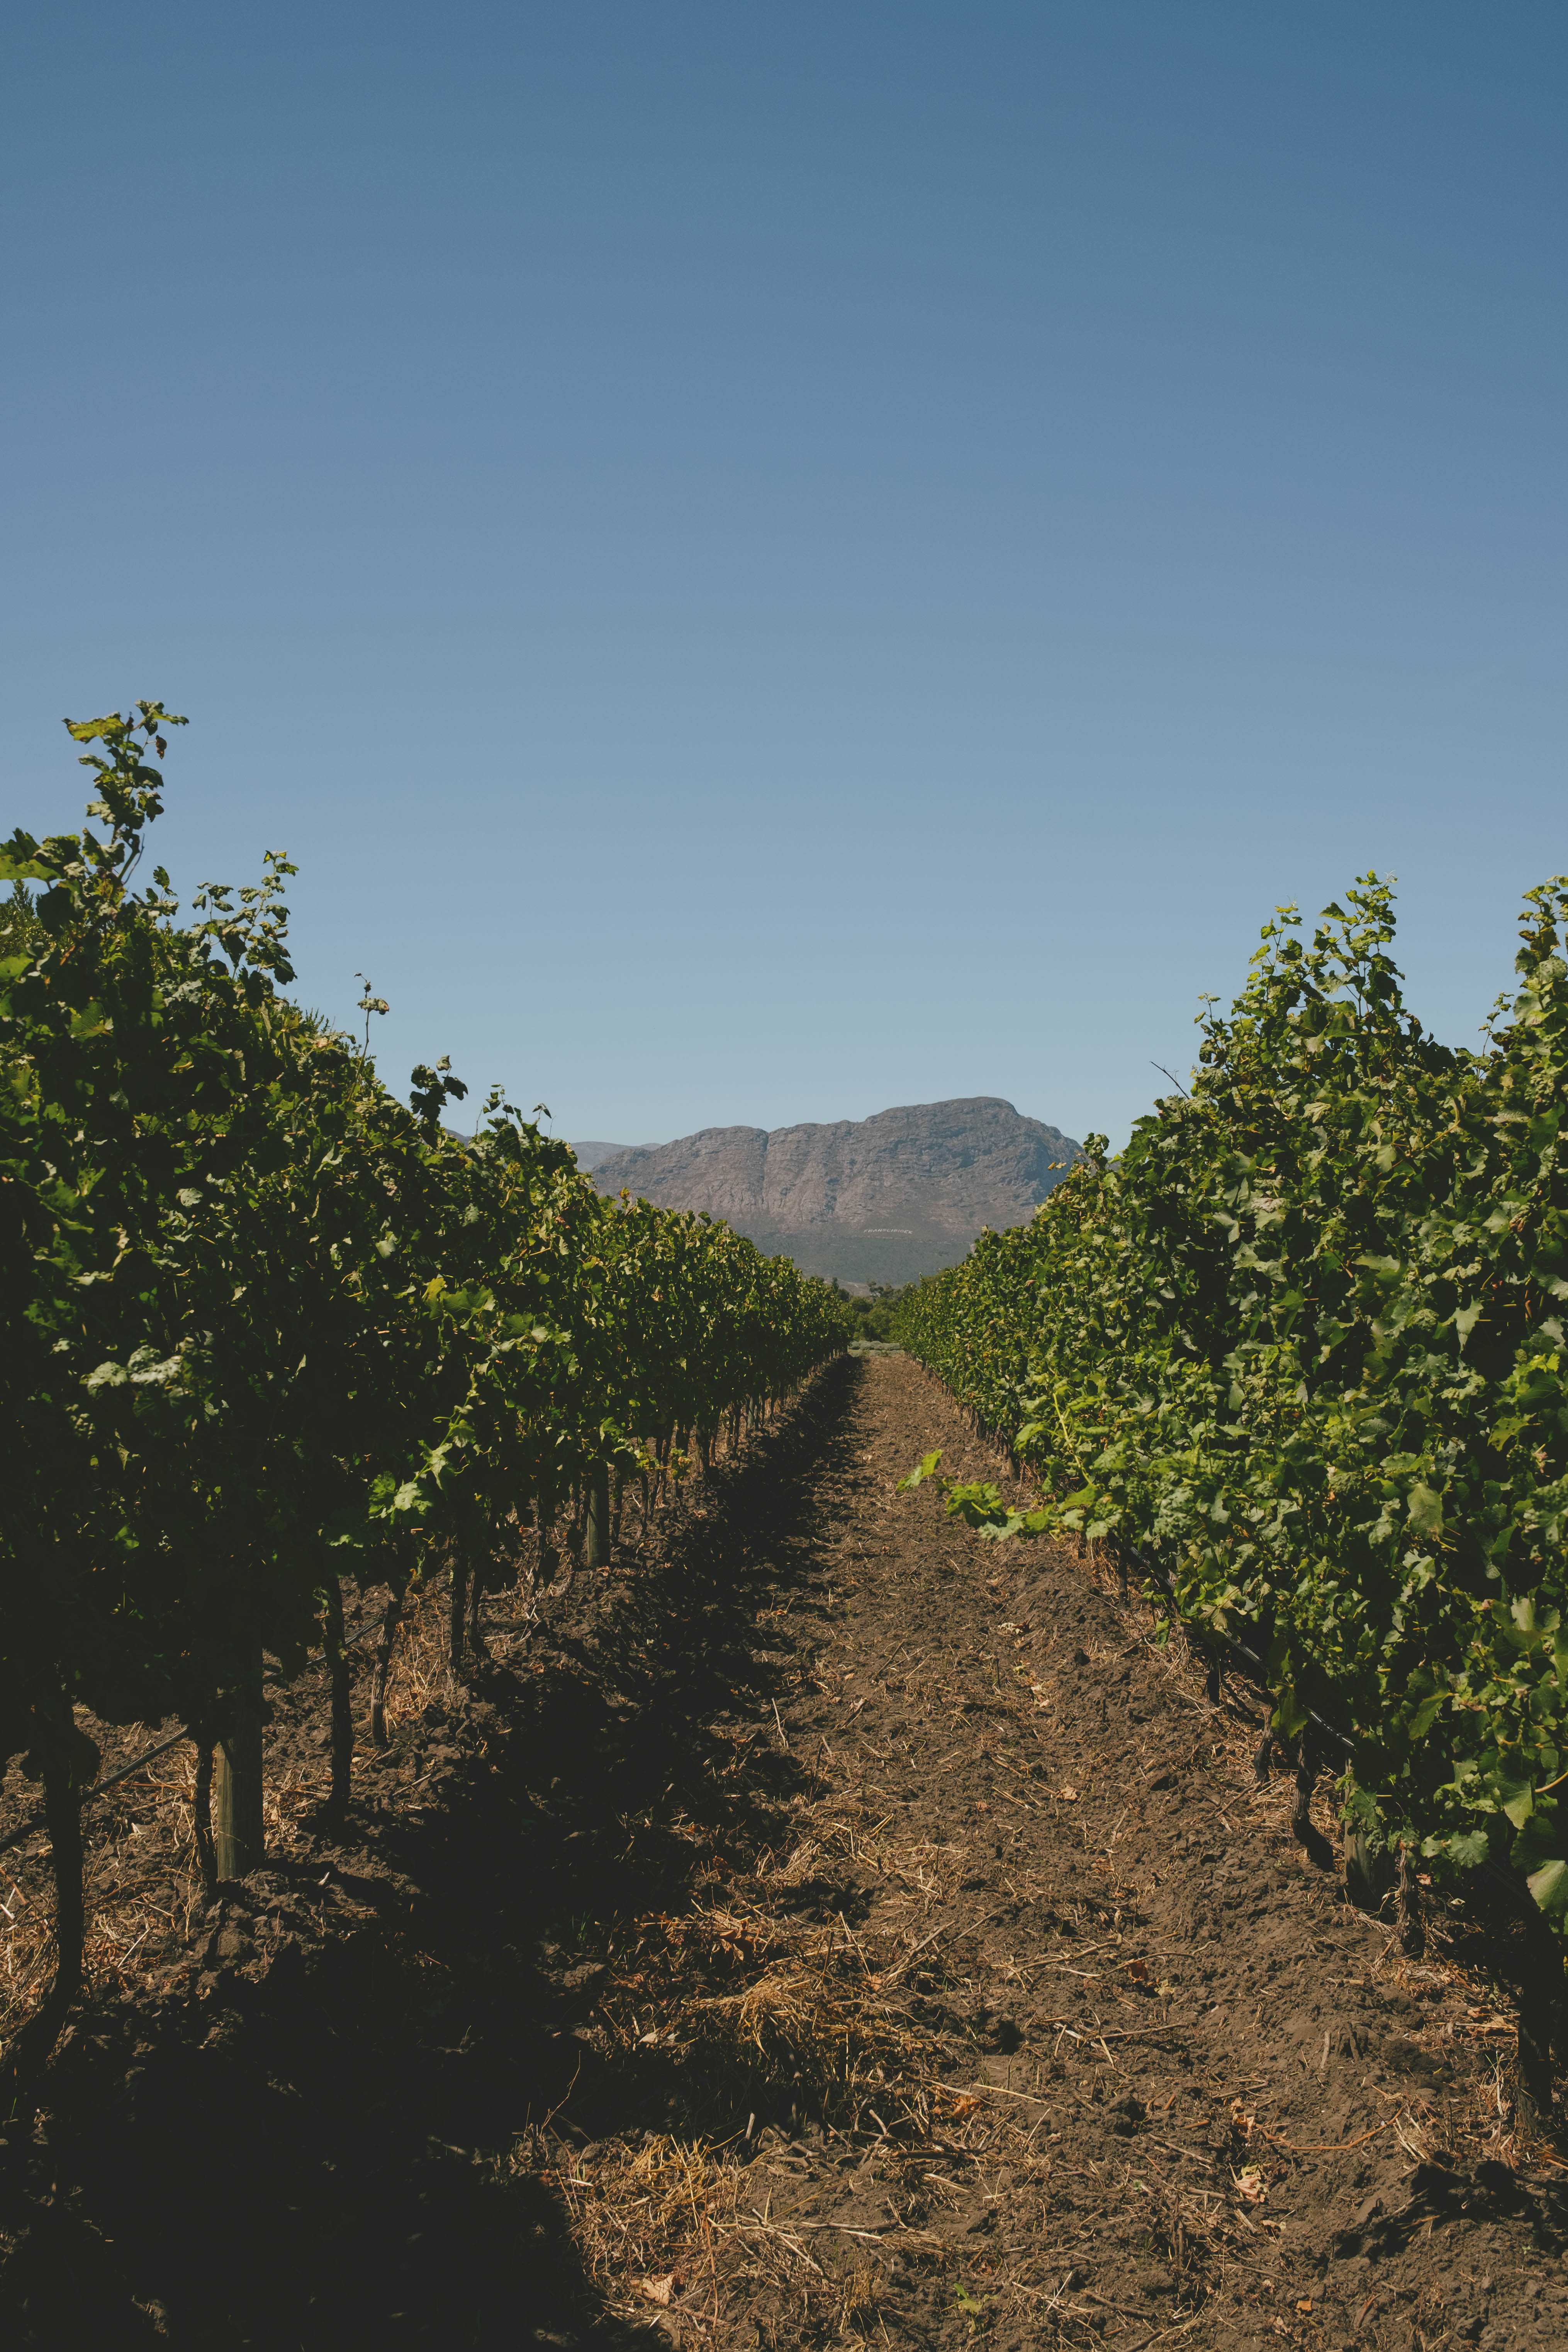 Looking down between a row of grapevines, with a mountain in the back.